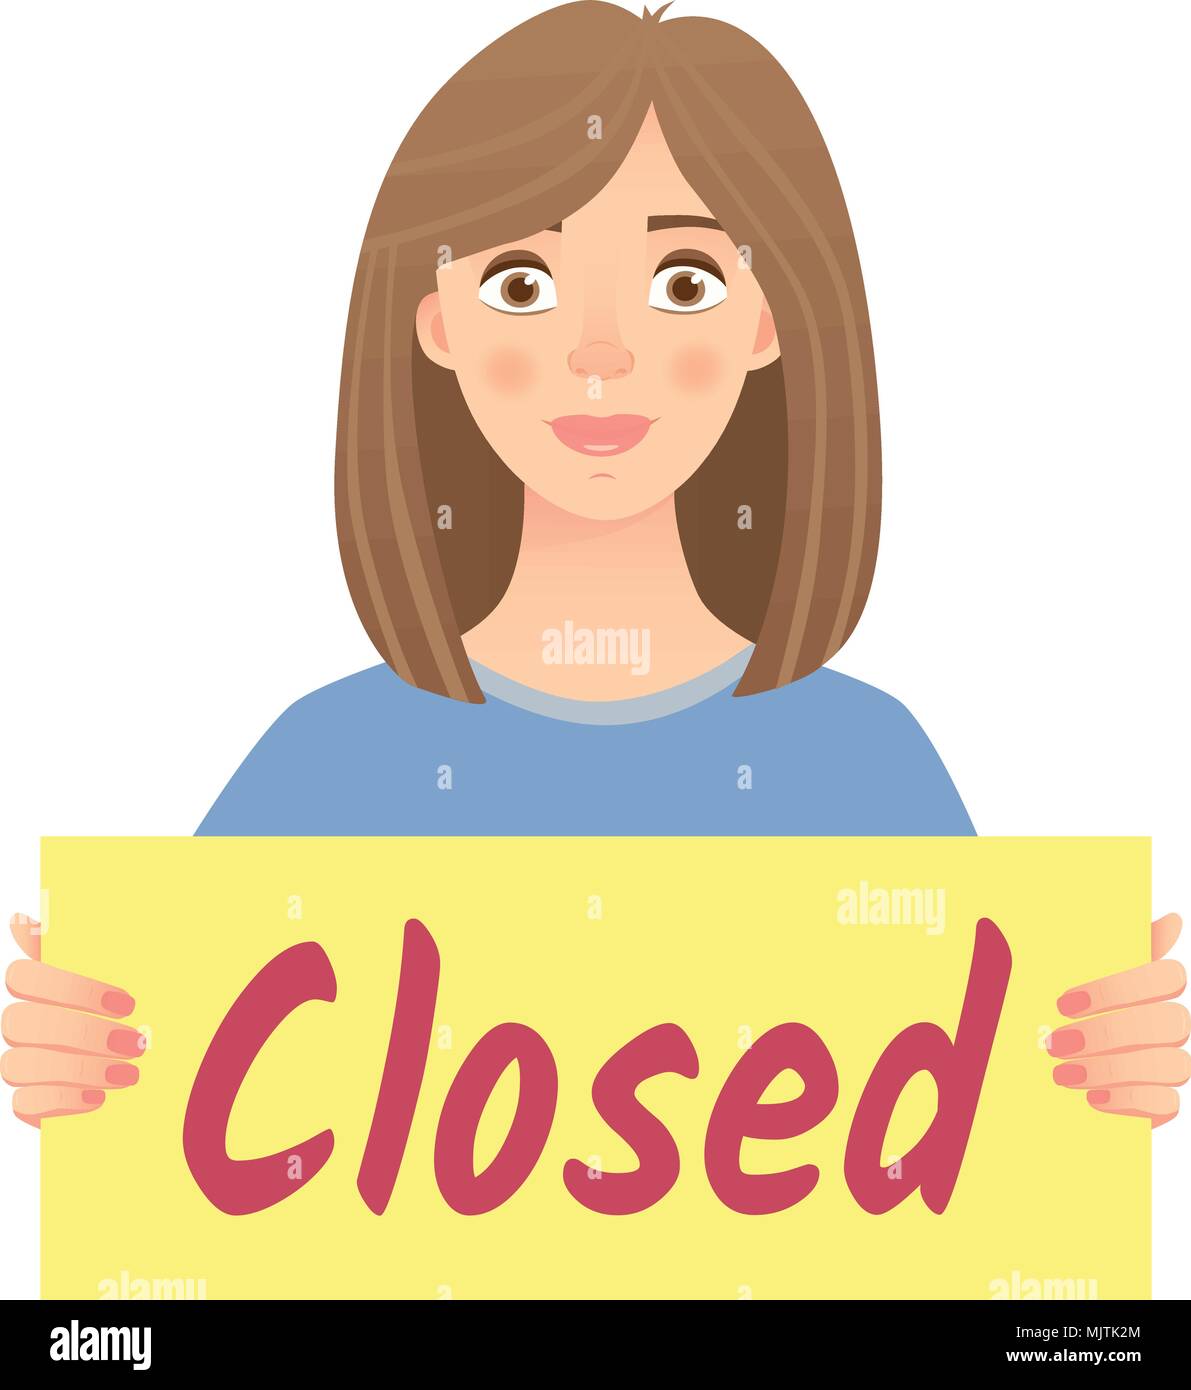 woman holding sign closed Stock Vector